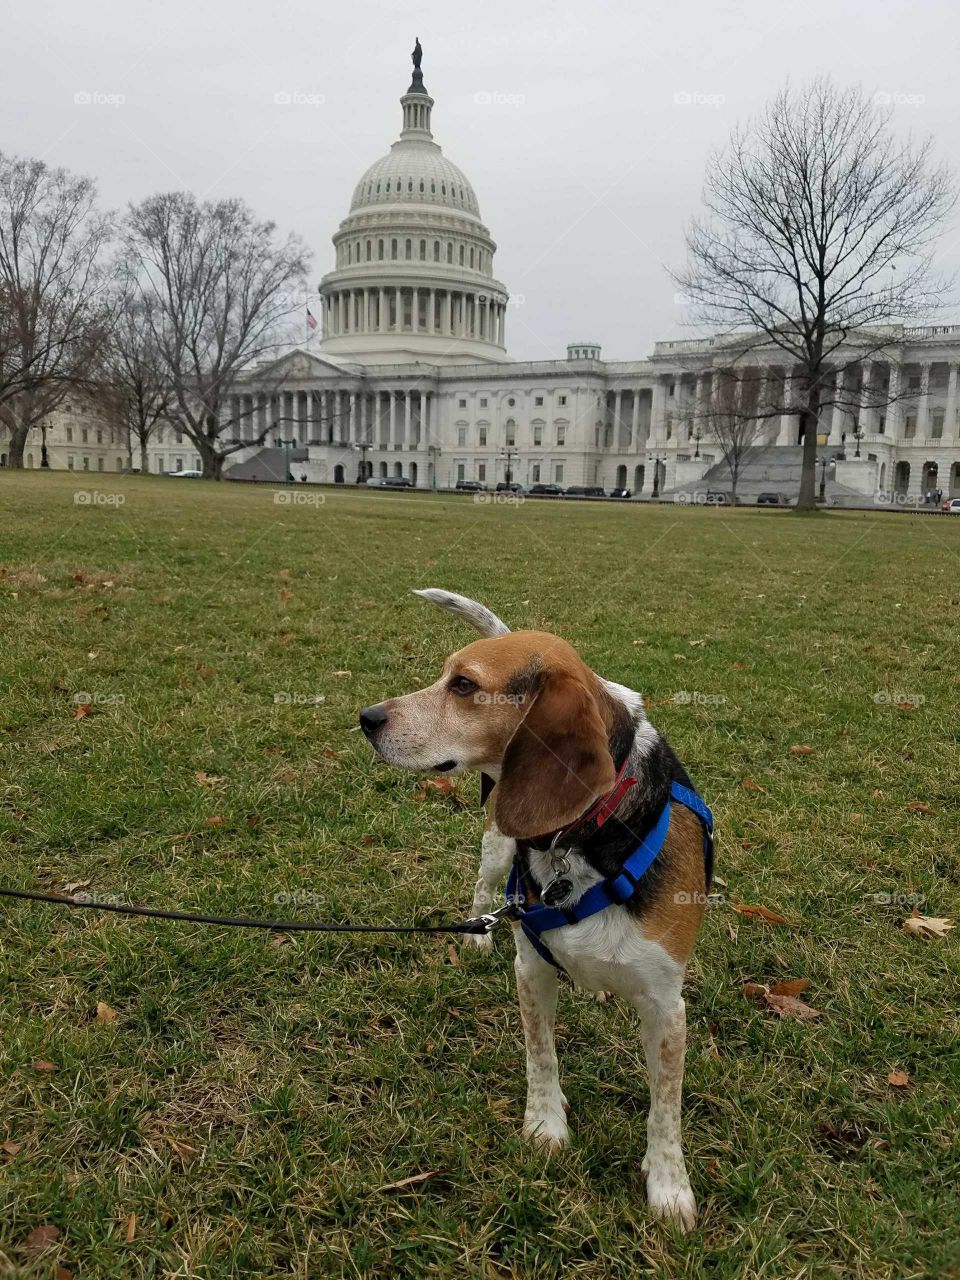 A beagle out for a walk at the US Capitol on a cloudy day. Photo taken March 2018.